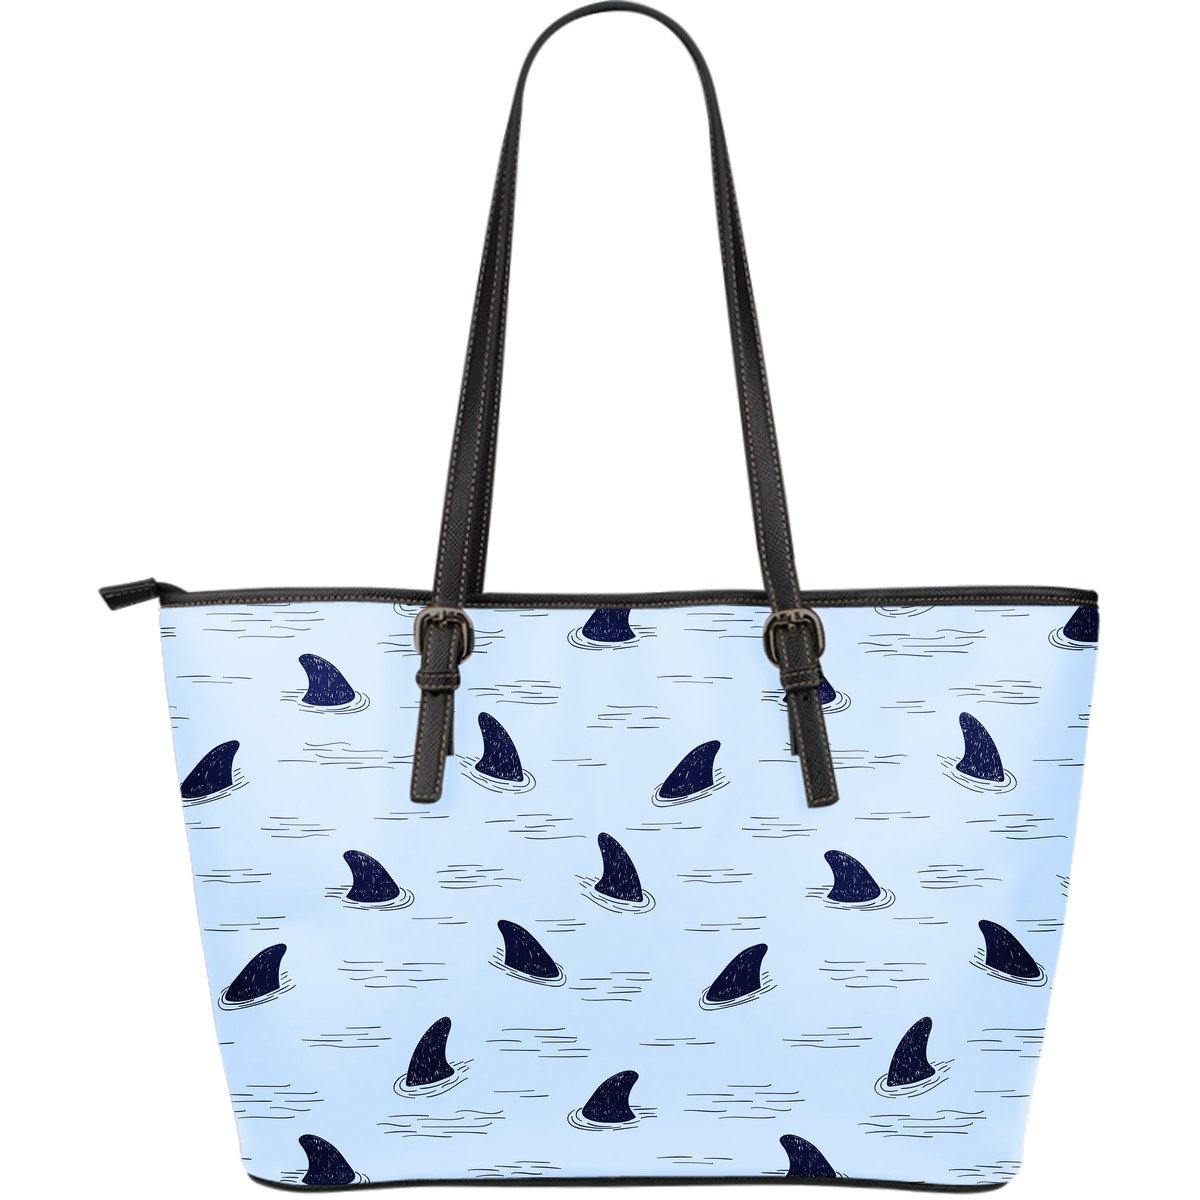 Shark Fin Large Leather Tote Bag